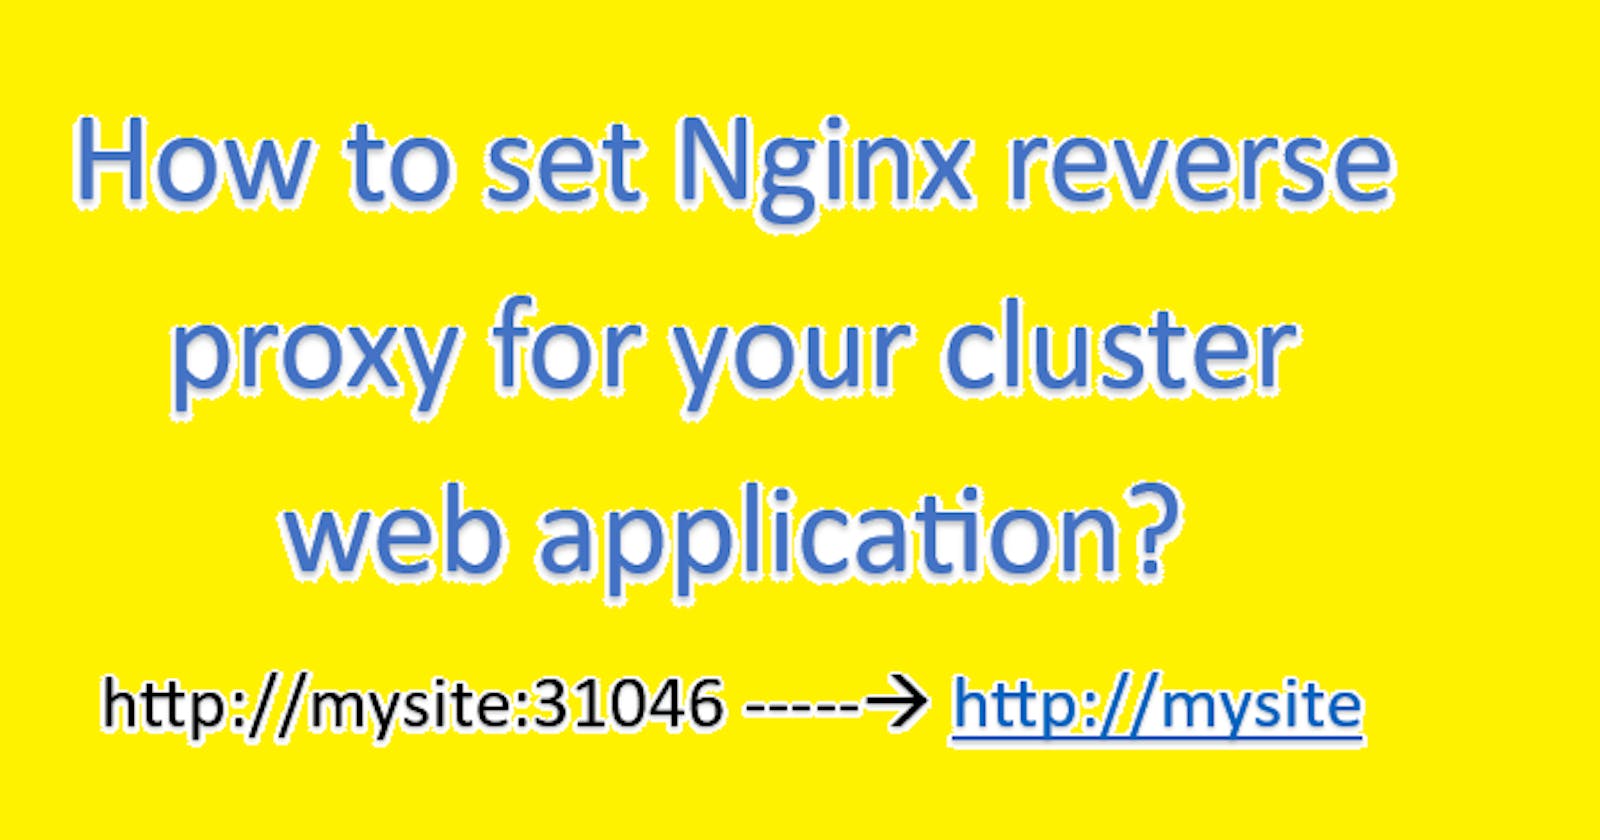 How to deploy nginx web-server on the kubernetes cluster and access through a custom domain name. Complete setup on easy Steps.